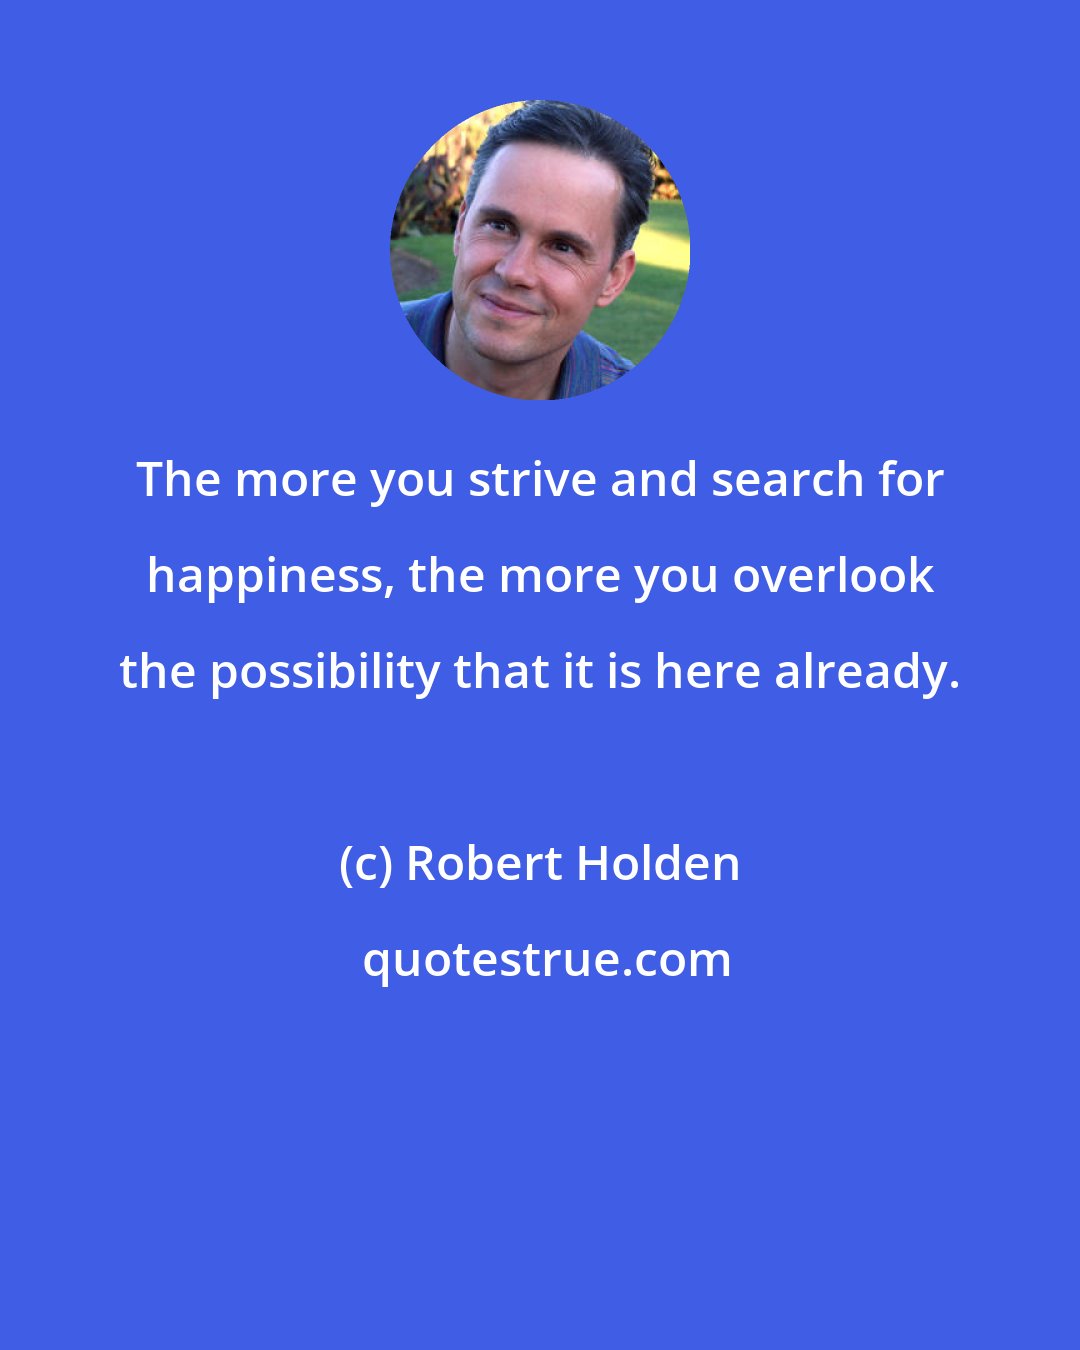 Robert Holden: The more you strive and search for happiness, the more you overlook the possibility that it is here already.